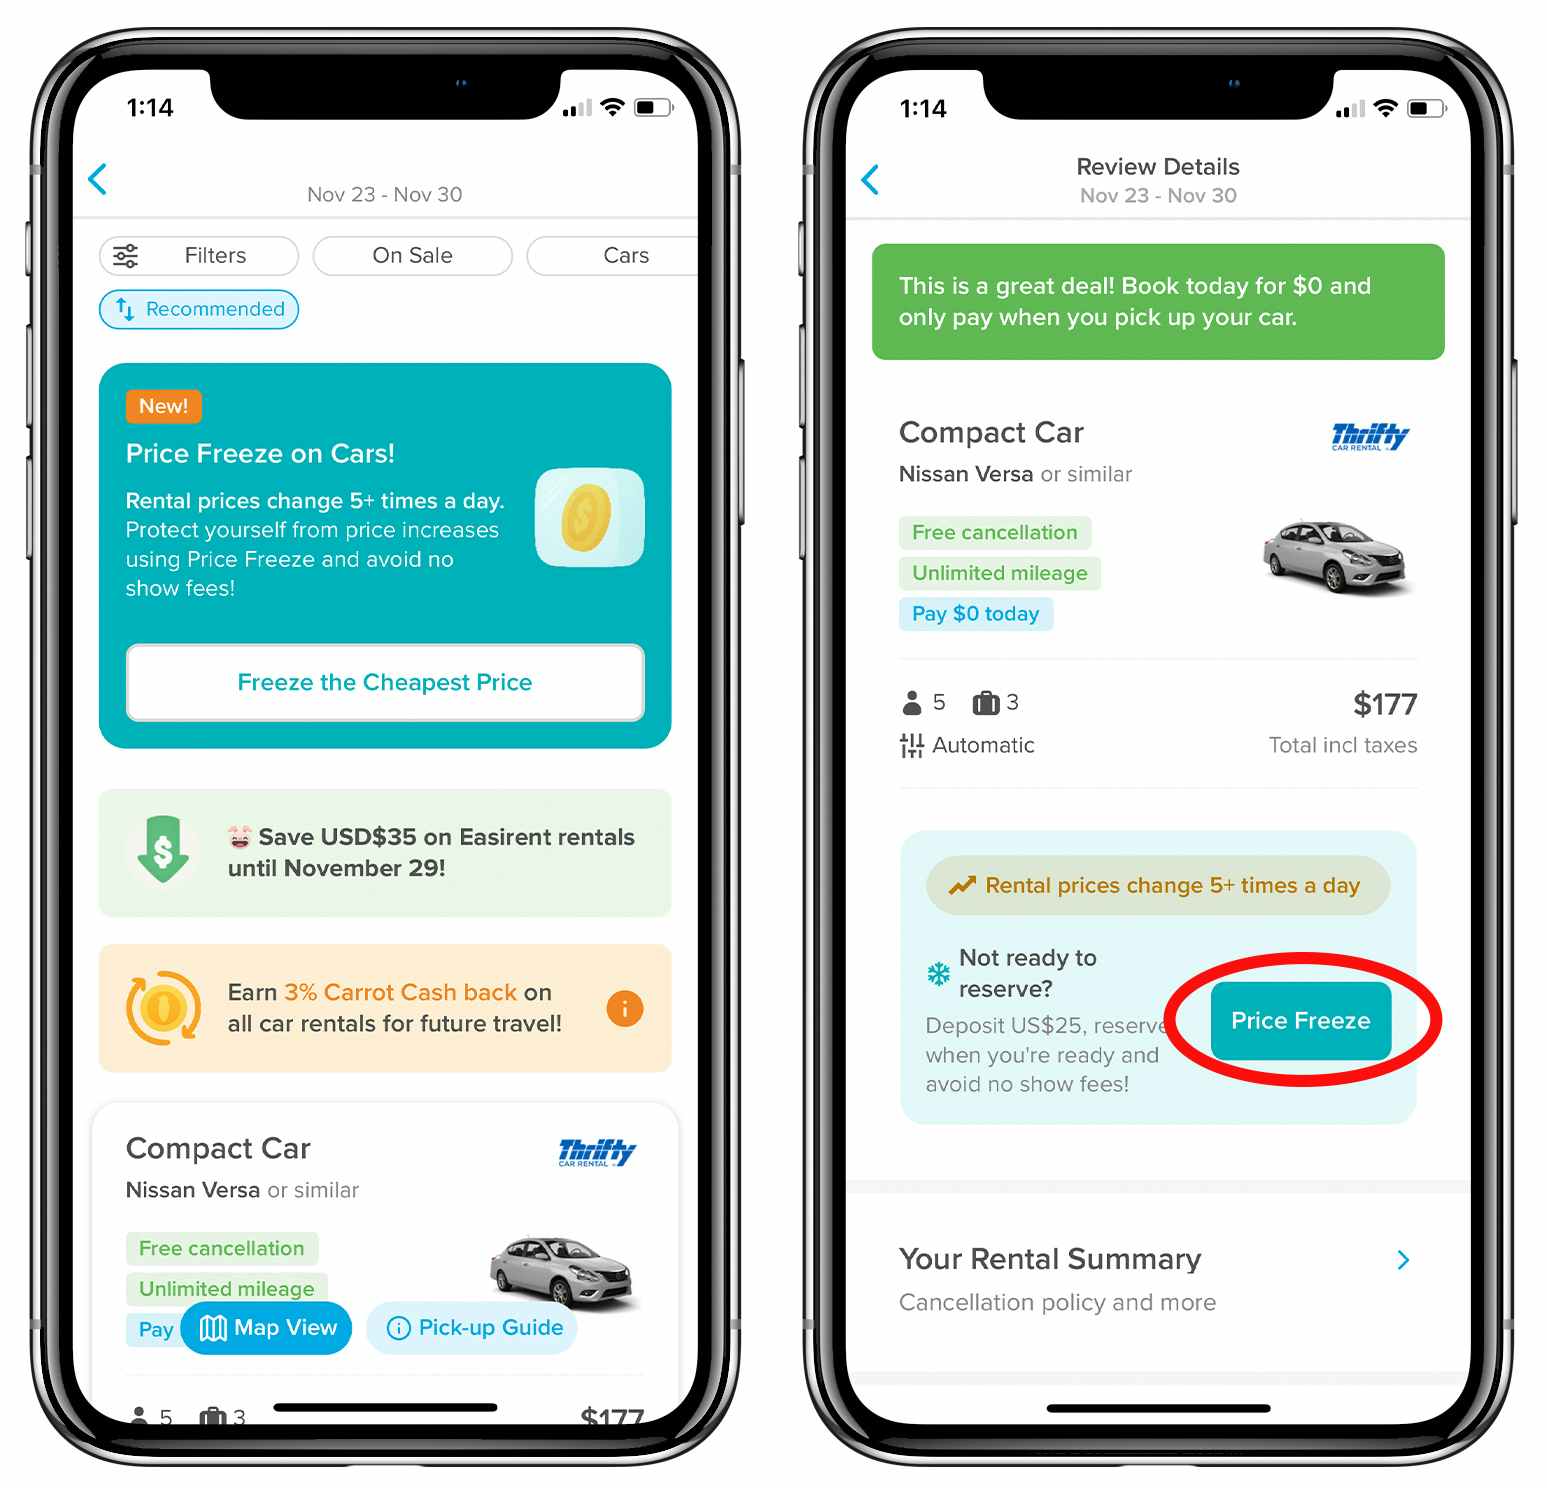 Two phones, each showing different pages of the car rental section of the Hopper app mentioning freezing current car prices